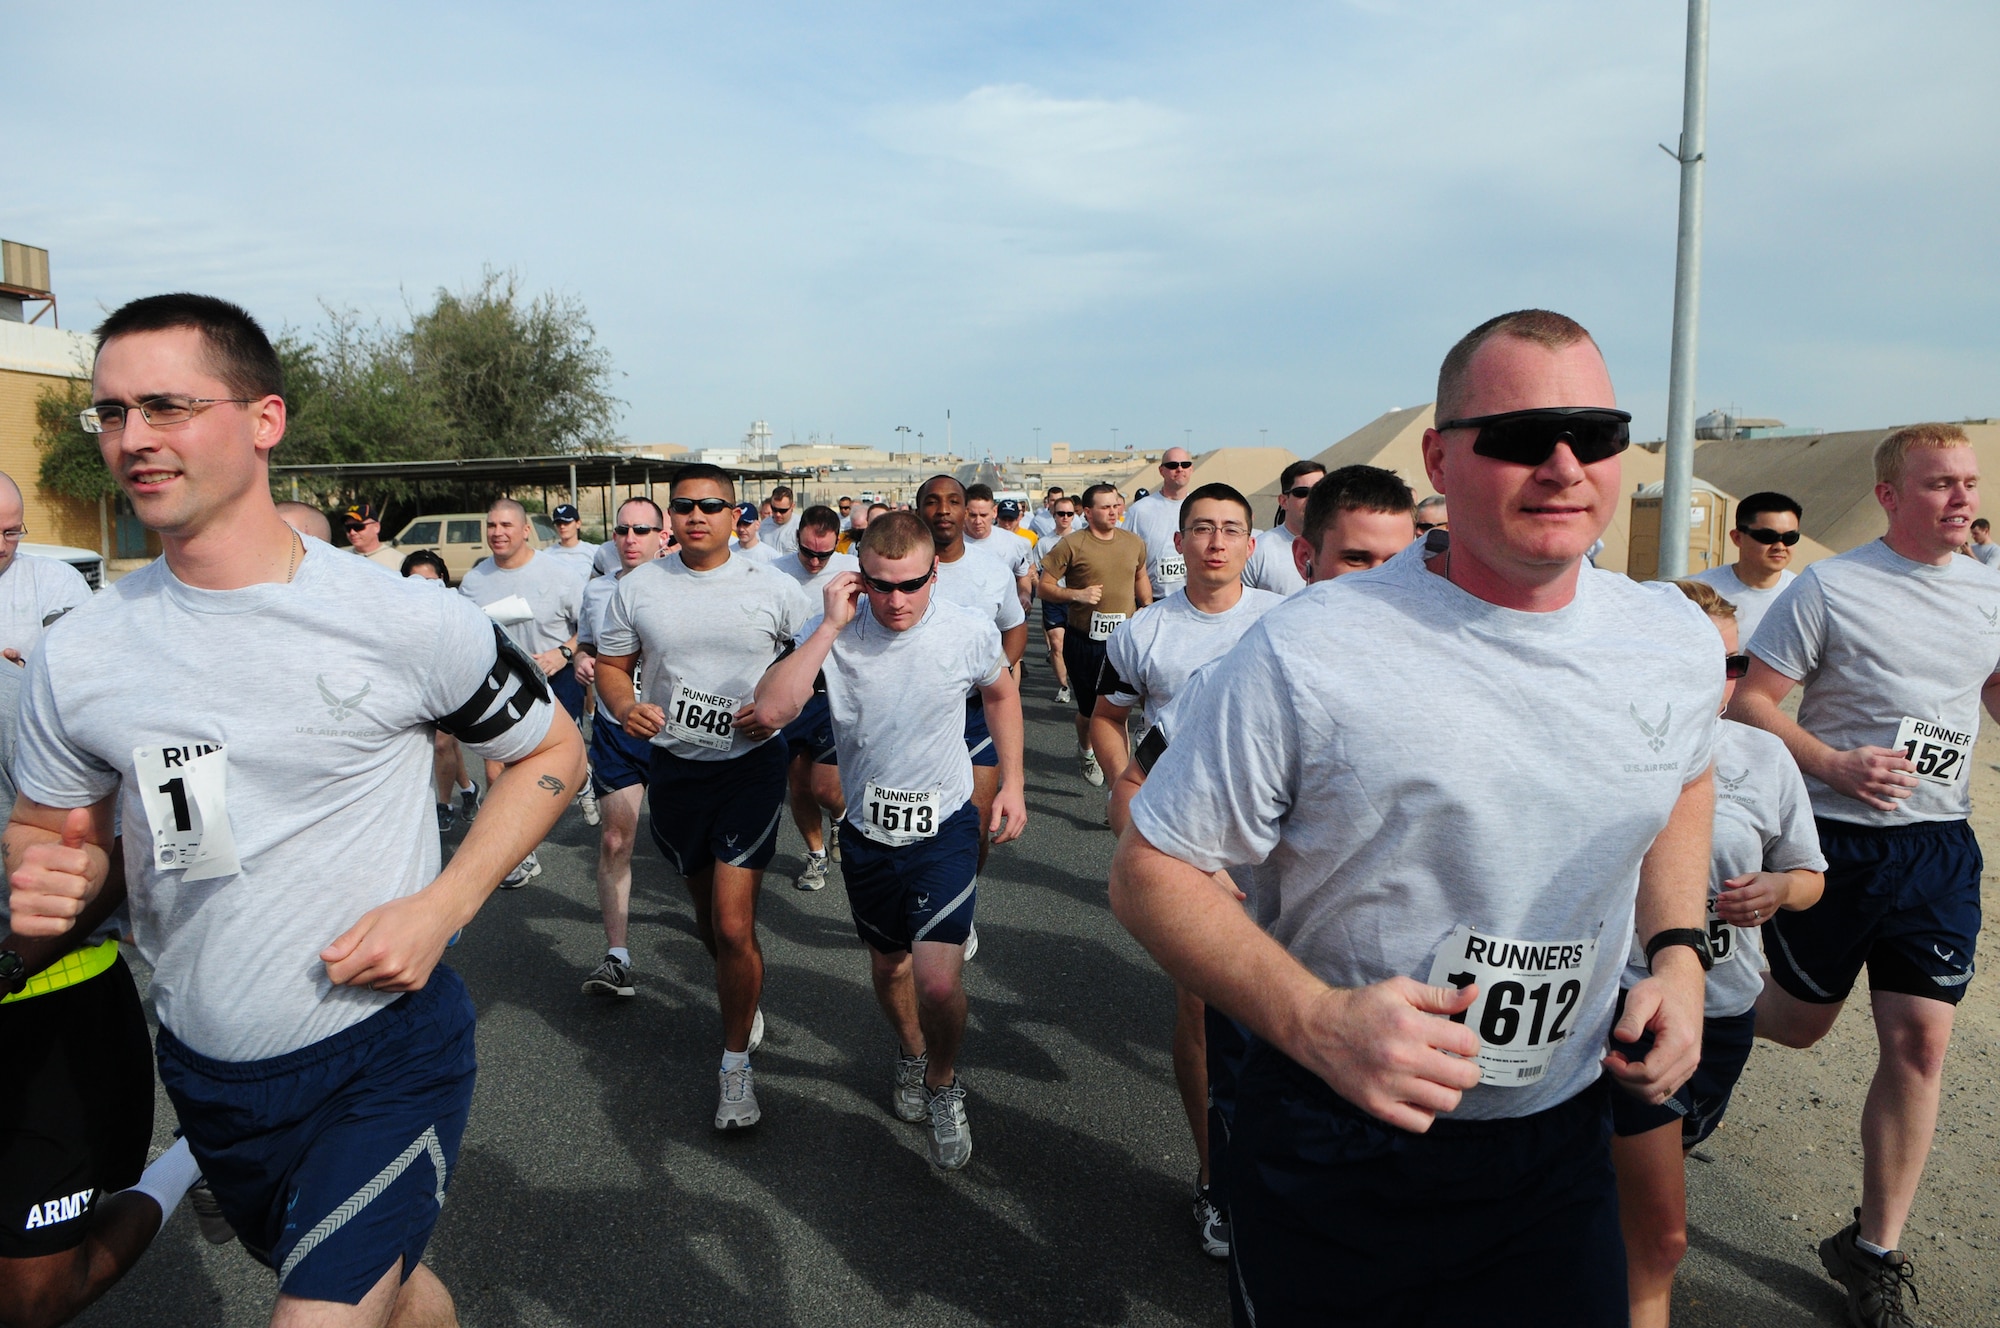 Participants begin the 10- and 5-kilometer Armed Forces MLK run Jan. 18, 2010 at an air base in Southwest Asia. About 150 servicemembers, Department of Defense civilian and contract personnel and coalition partners participated in the race honoring Martin Luther King Jr. The event was sponsored by HFP Racing. (U.S. Air Force photo by Staff Sgt. Robert Sizelove/Released)